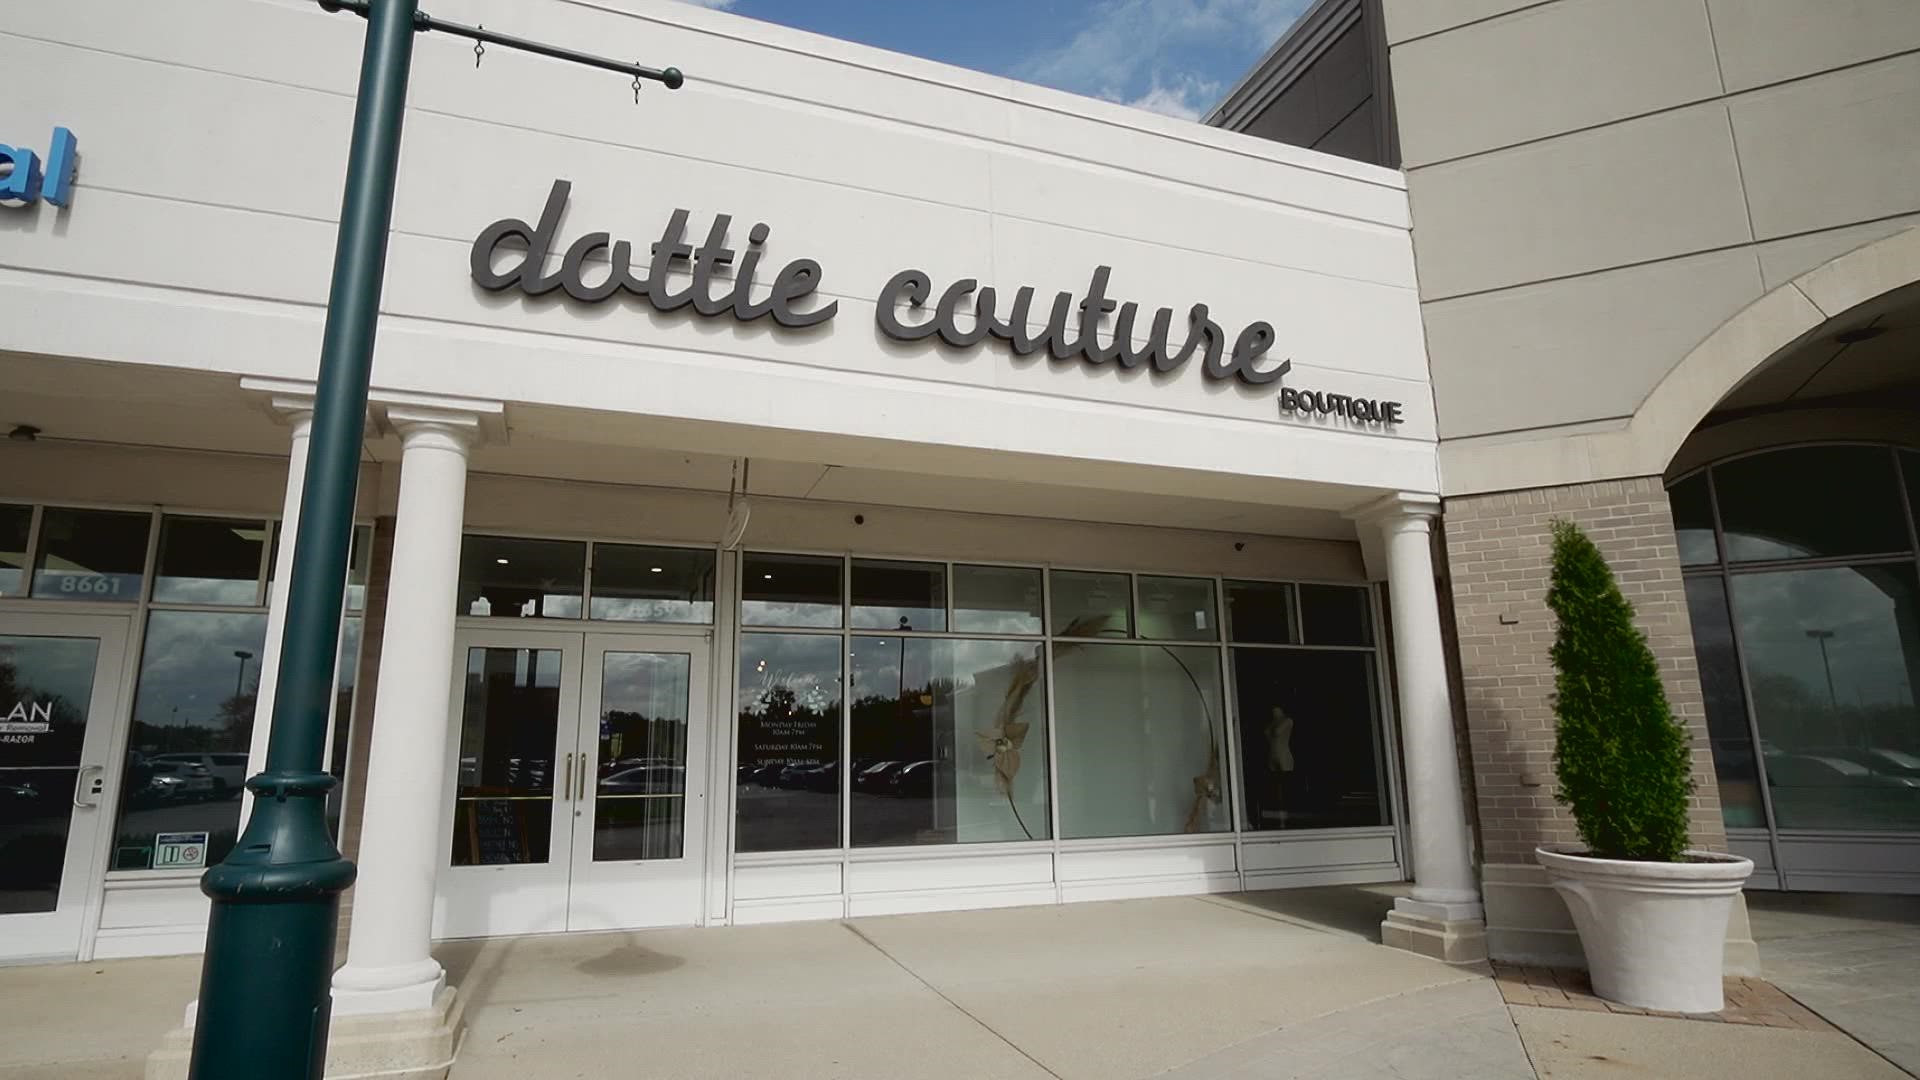 Customers of Dottie Couture Boutique said they tried unsuccessfully to make purchases when they learned of a store liquidation.